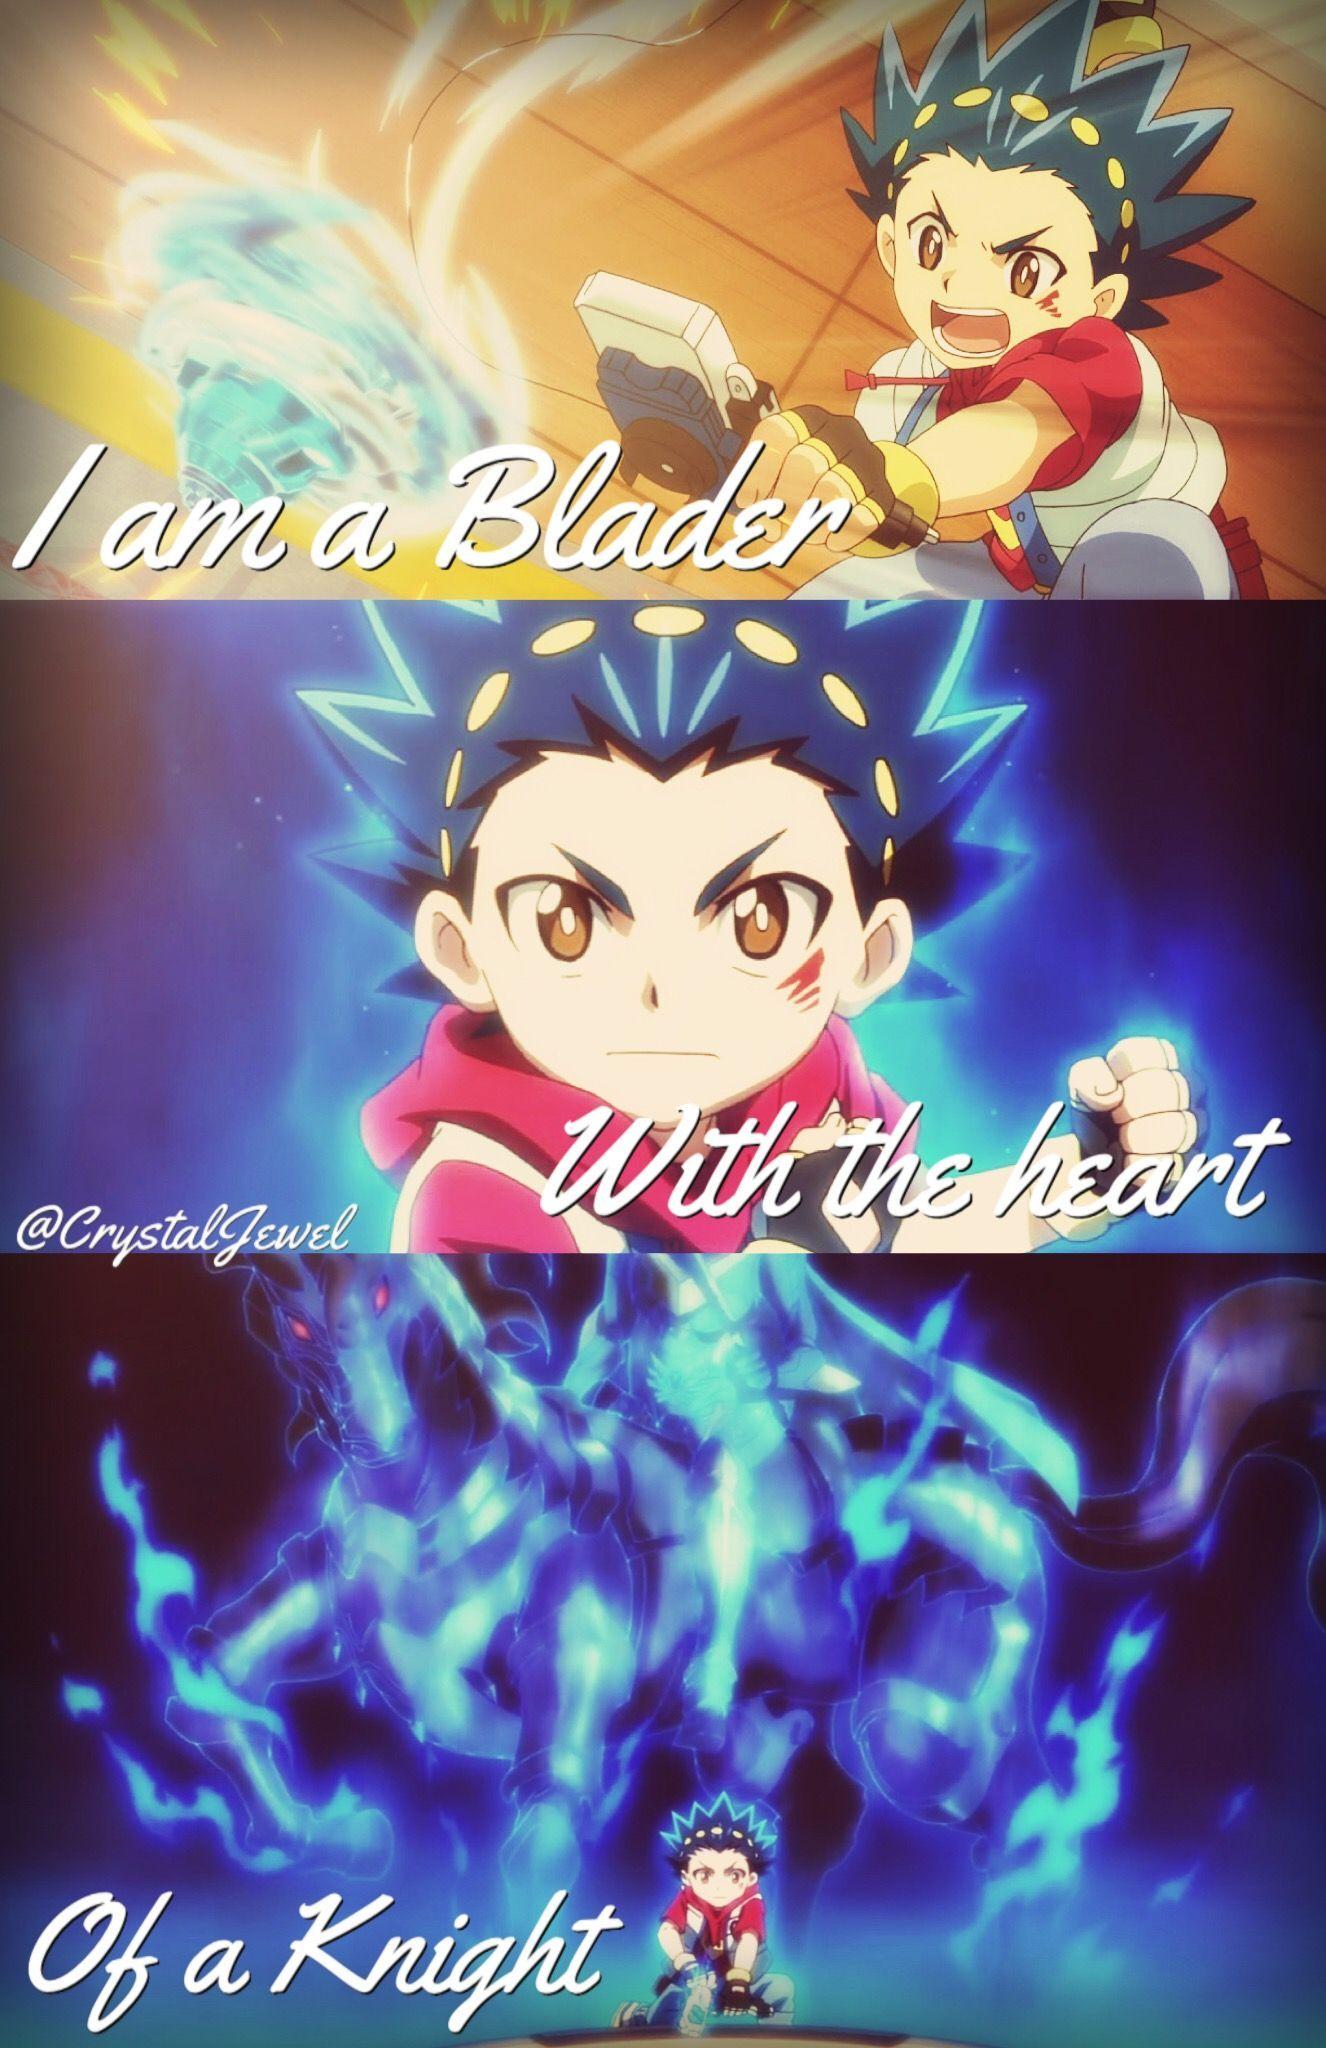 I am a Blader with the heart of a Knight” -Valt Aoi